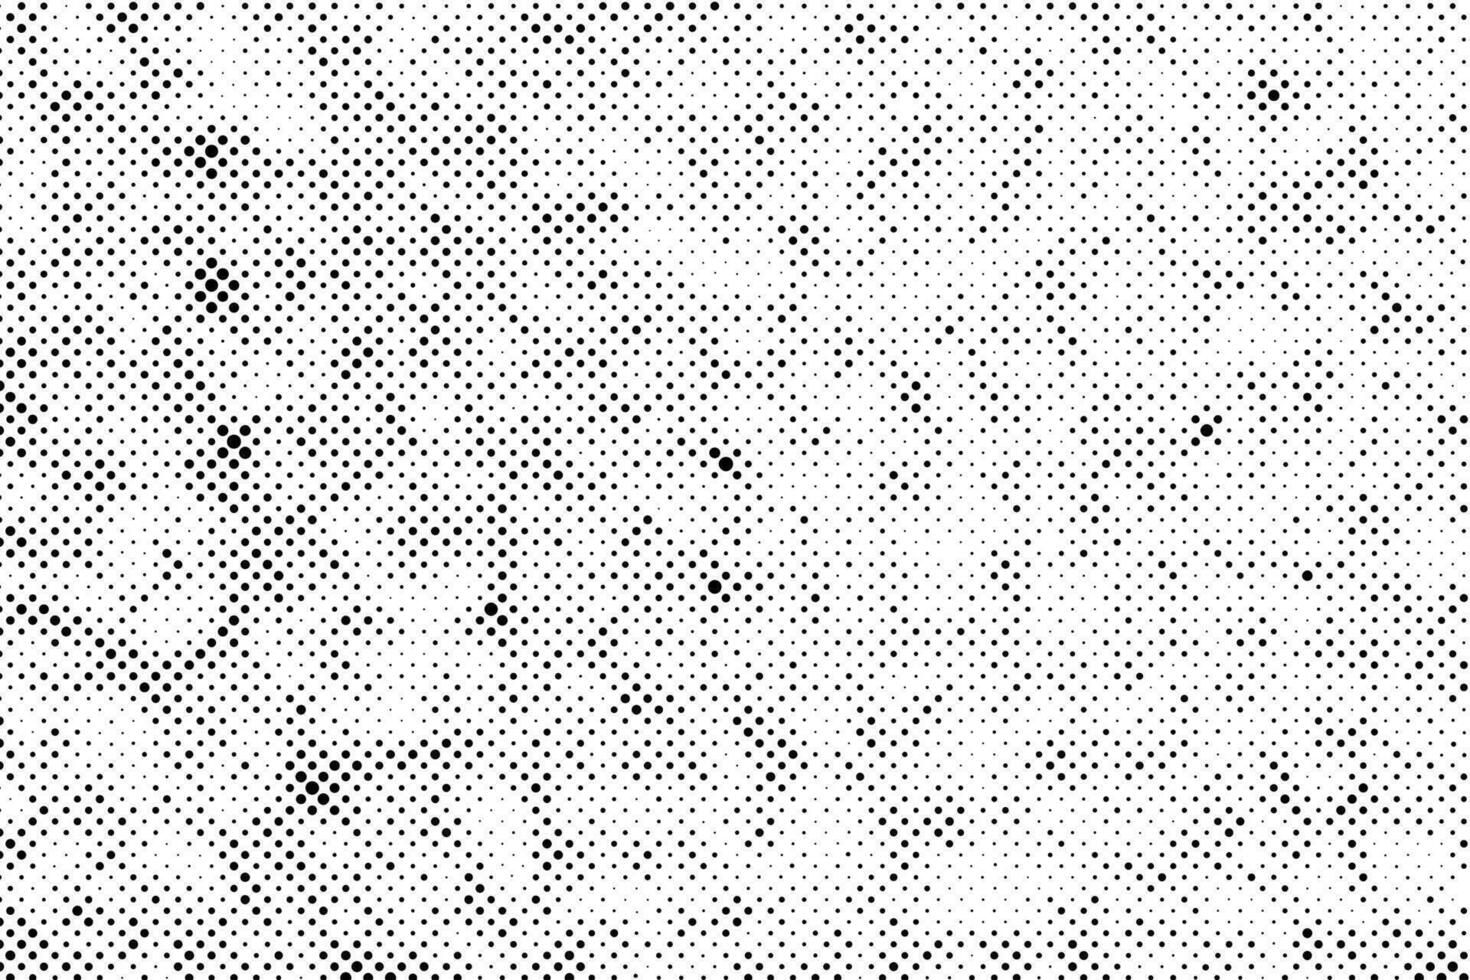 Vector grunge halftone abstract. Dots pattern texture background.